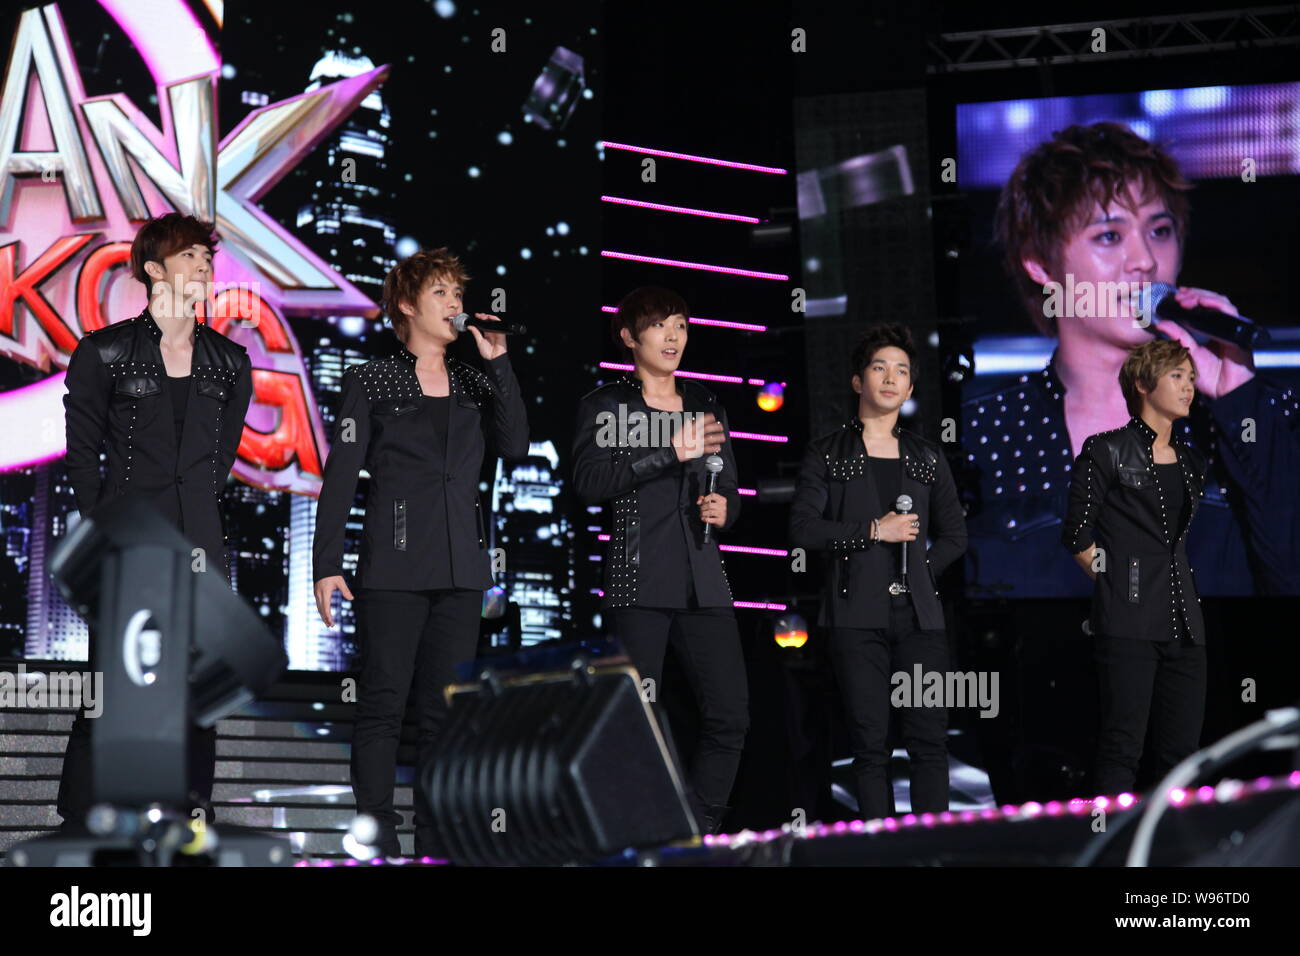 Members of South Korean pop group MBLAQ perform at the K-POP Festival Music Bank concert in Hong Kong, China, 23 June 2012.   Thousands of fans flocke Stock Photo